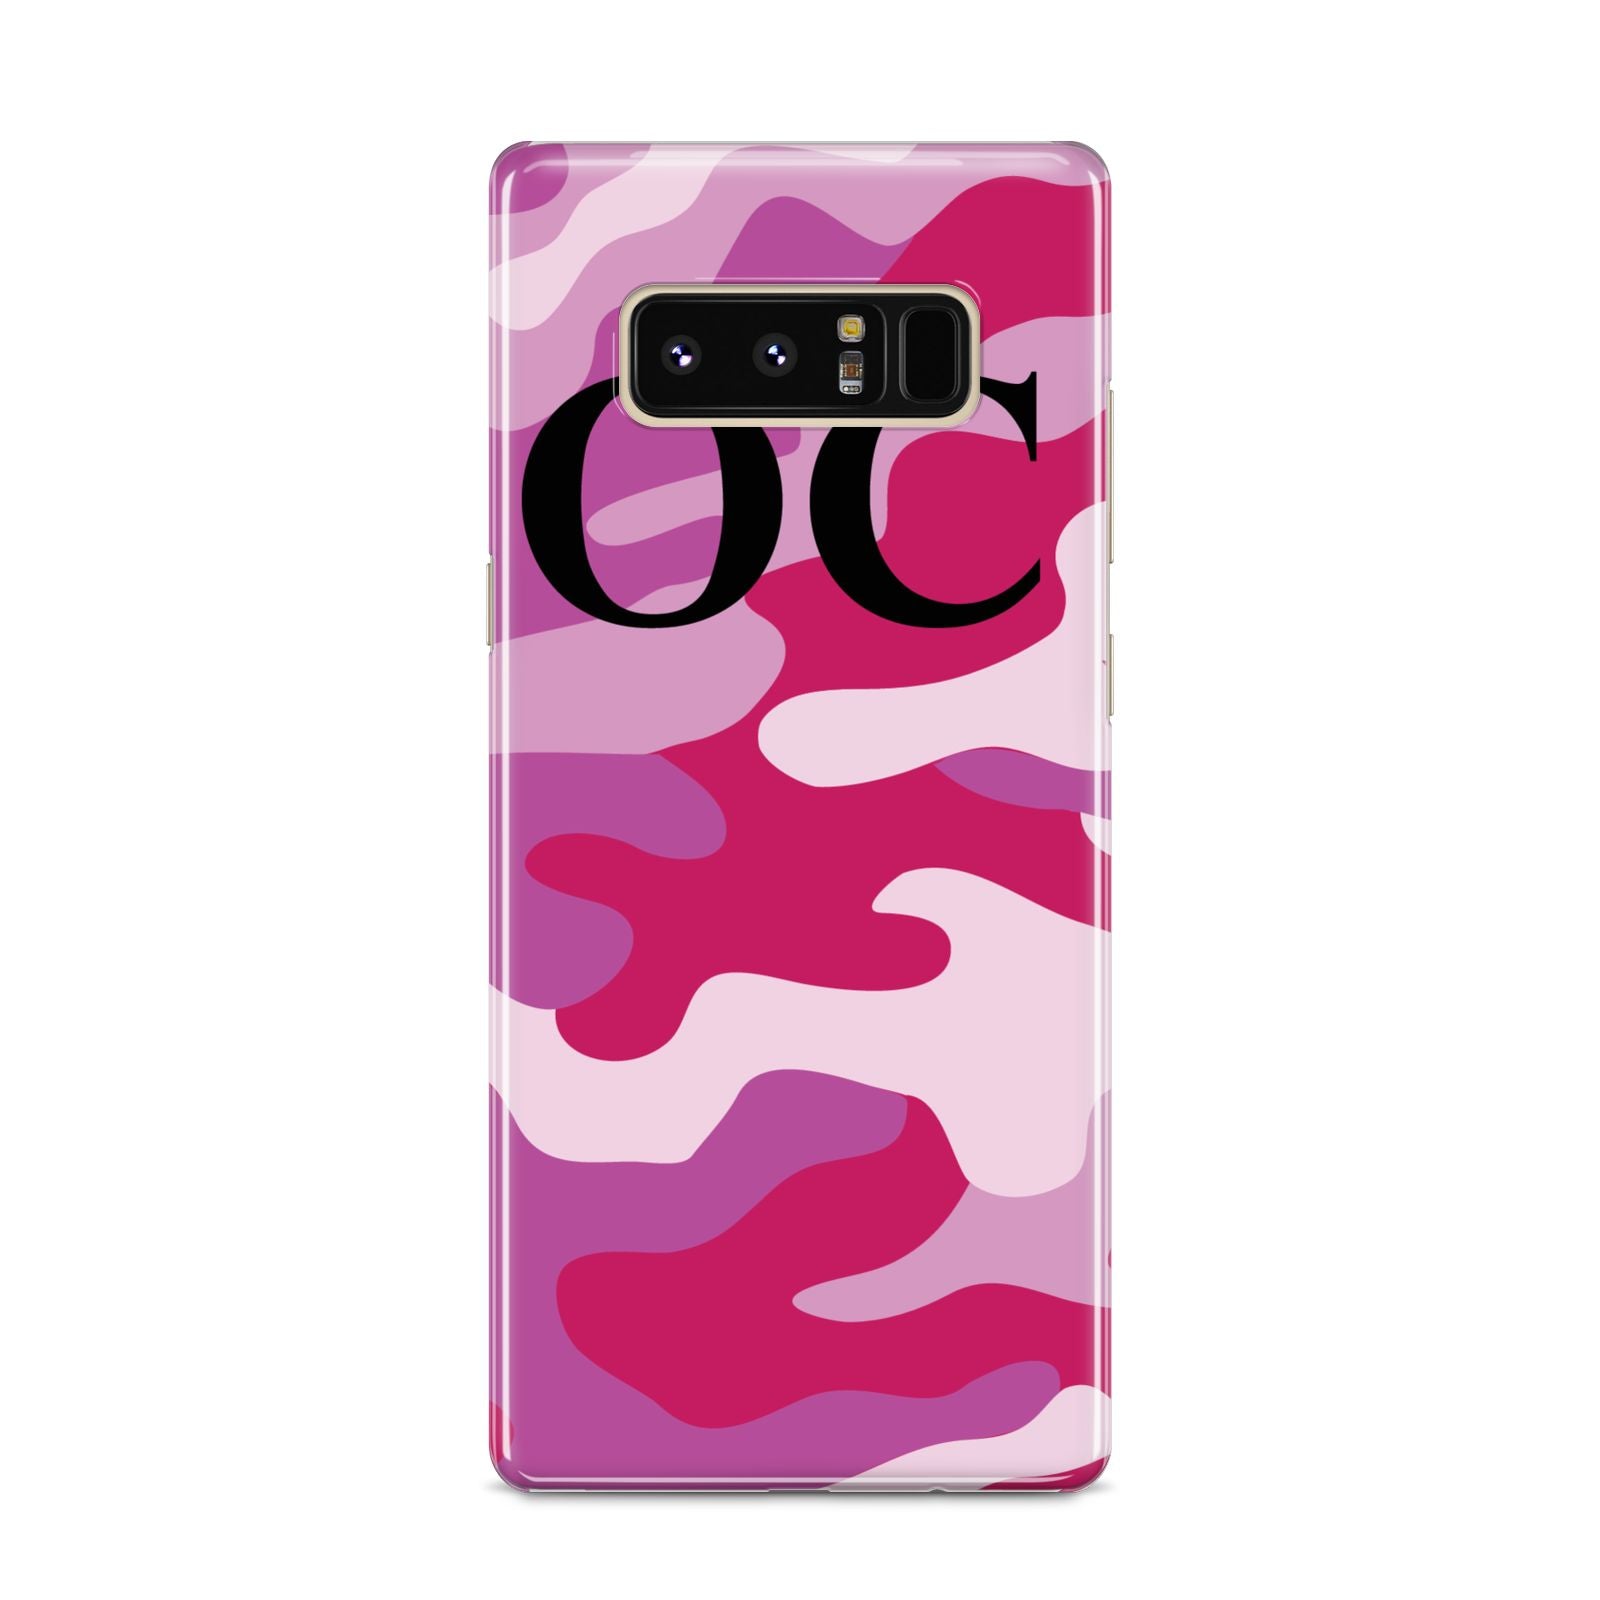 Camouflage Personalised Samsung Galaxy S8 Case